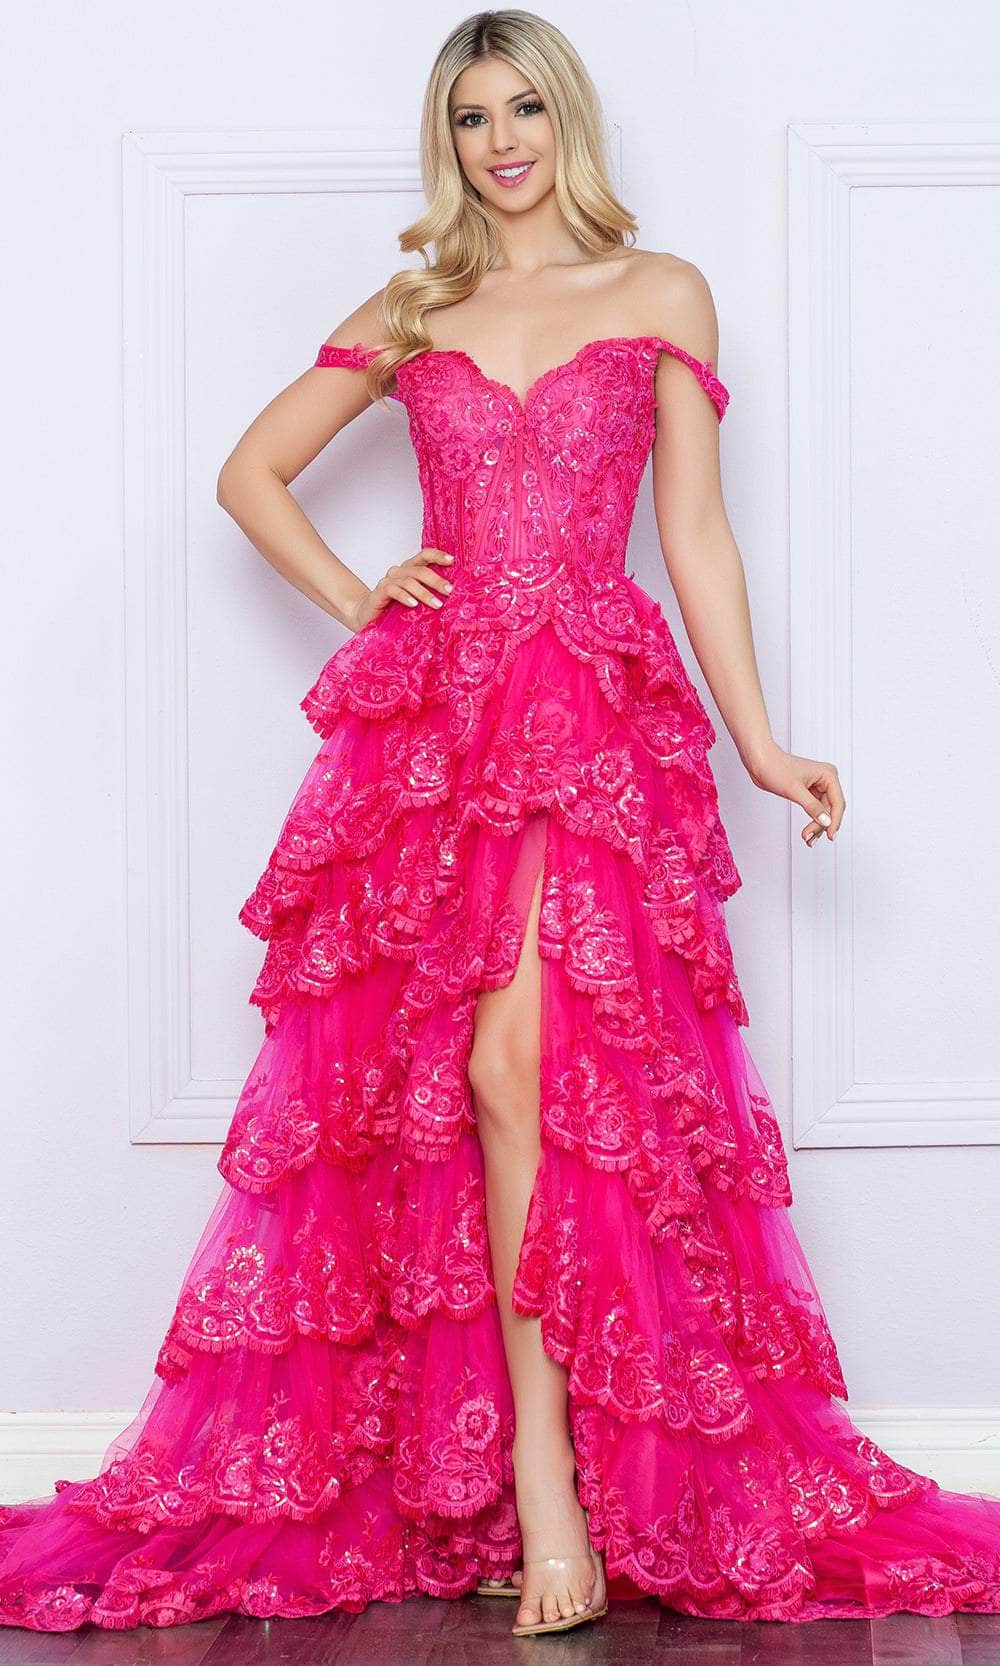 Nox Anabel R1299 - Sequin Tiered Prom Dress Special Occasion Dresses 